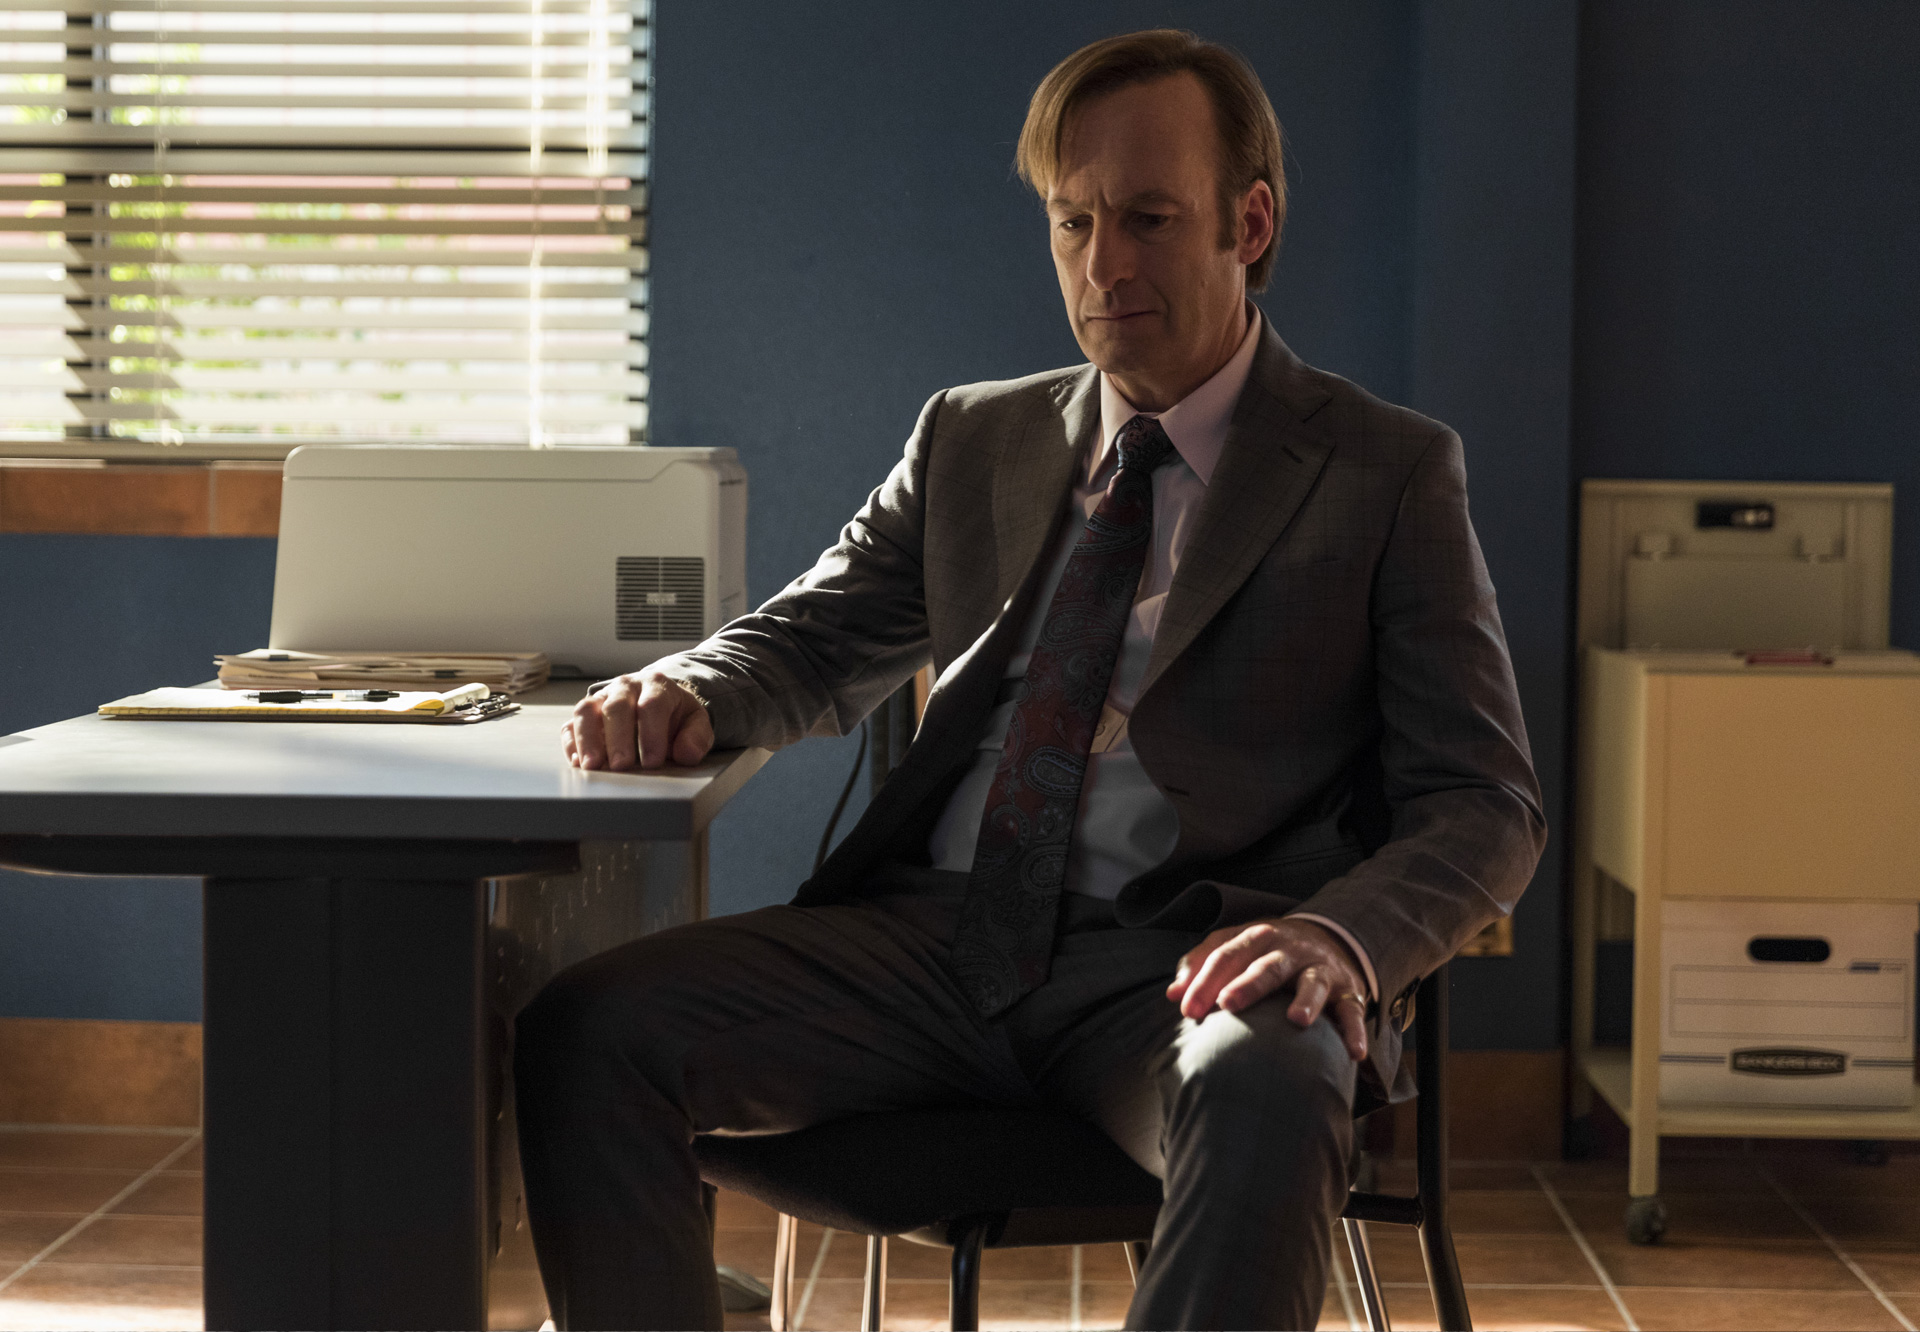 Albuquerque plays a pivotal role in the AMC series, Better Call Saul. New Mexico Magazine